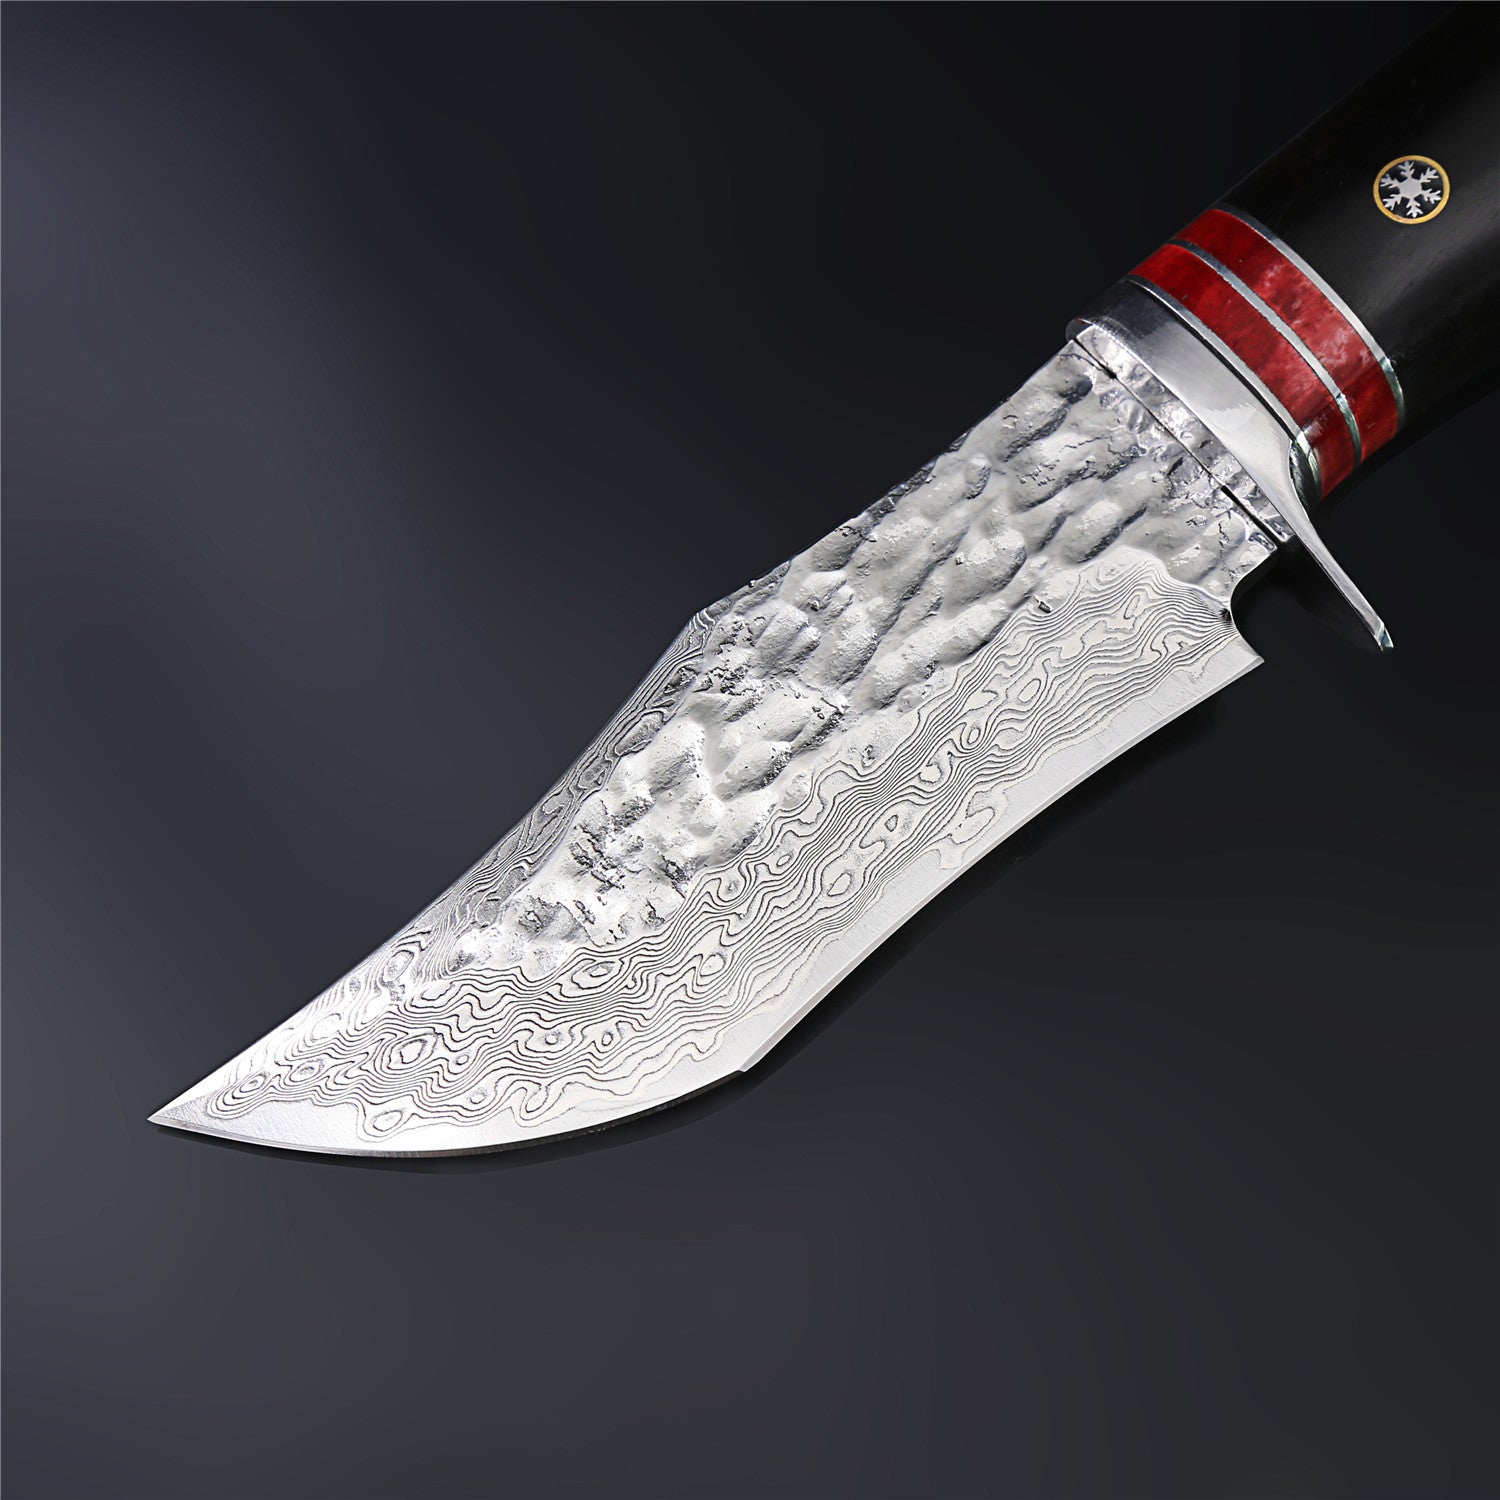 The General Damascus Steel Fixed Blade